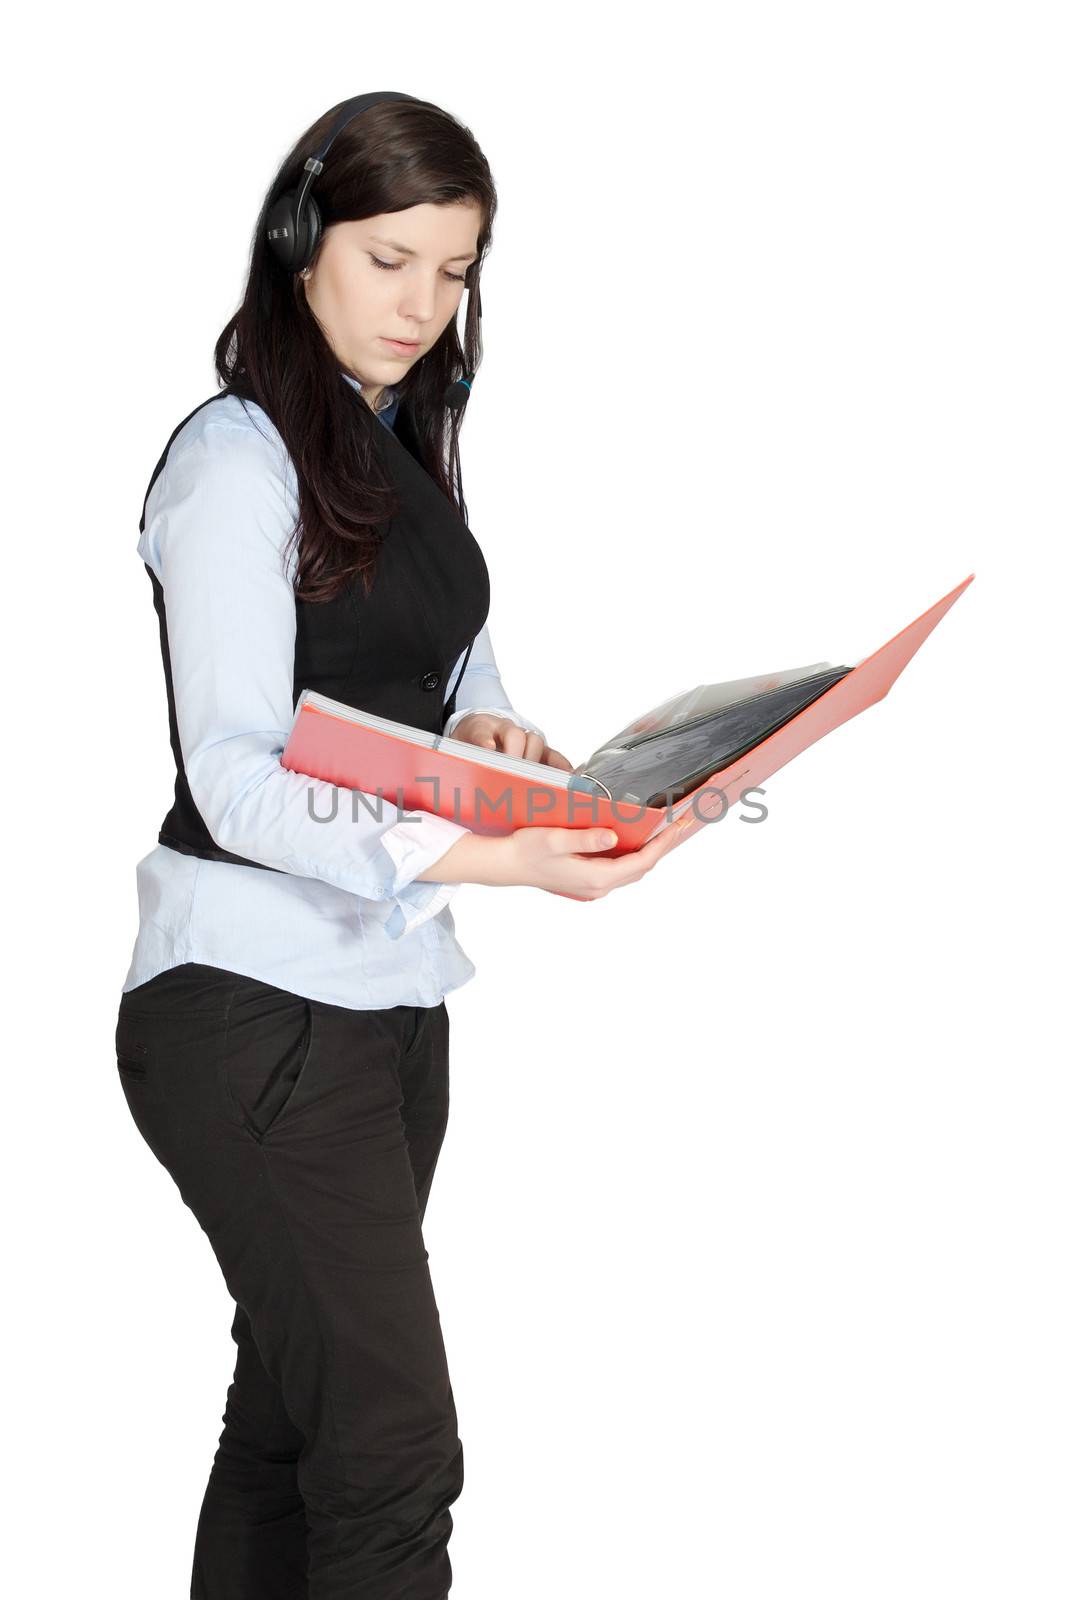 Young woman with headset phone while walking and holding hands a pile of documents, isolated on white background